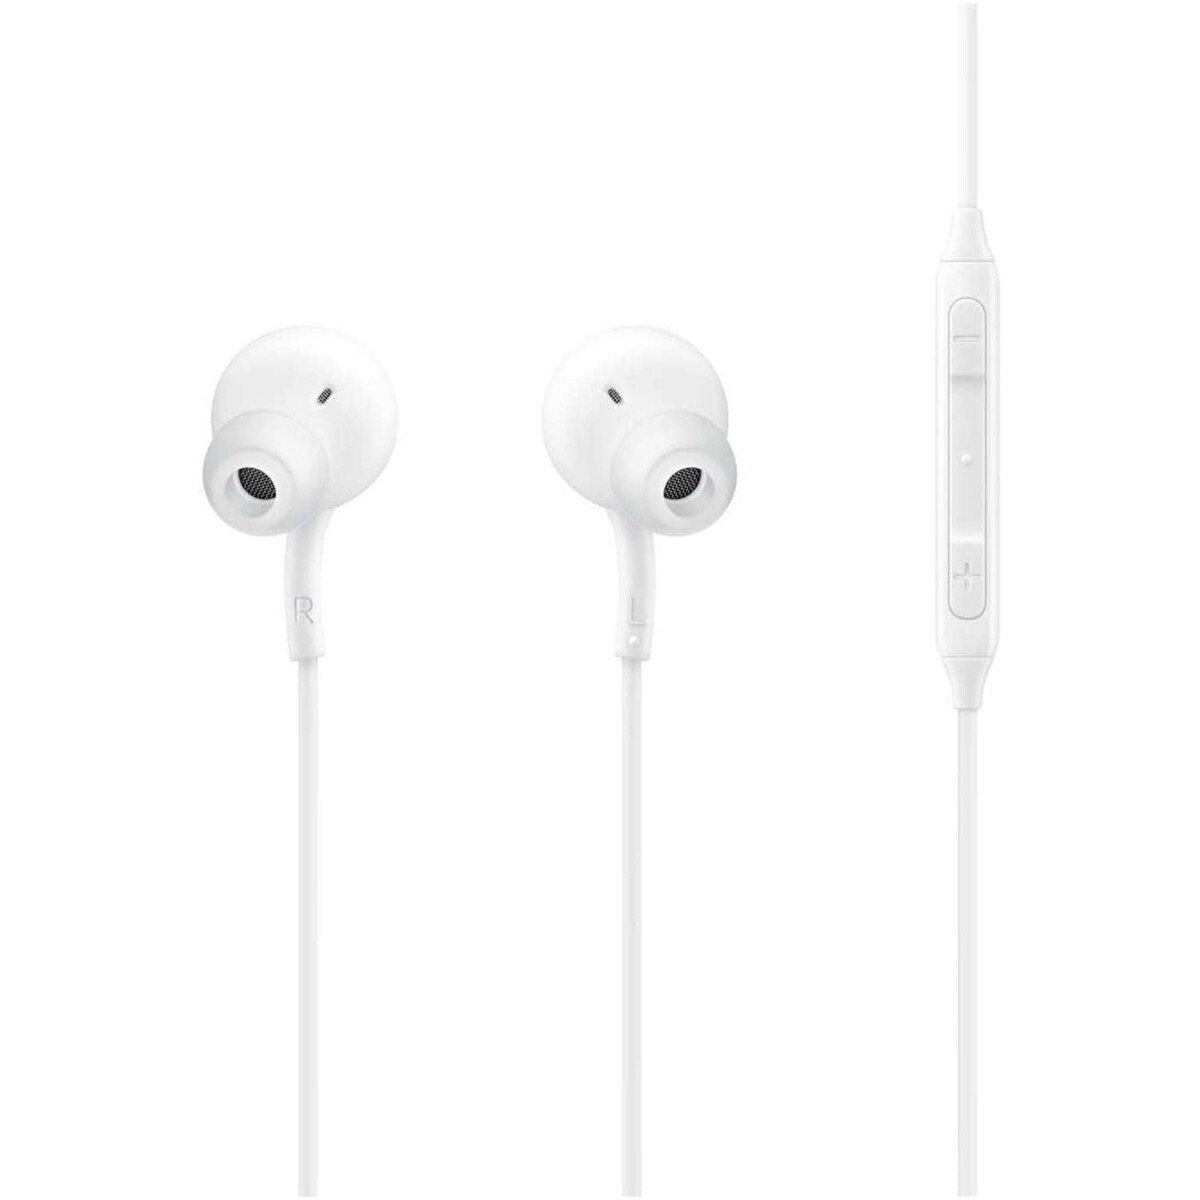 Samsung Stereo In-Ear Hands | Lulu Mobile Free Earphones EO-IC100 at Price Kuwait Type-C Online Best (White) 